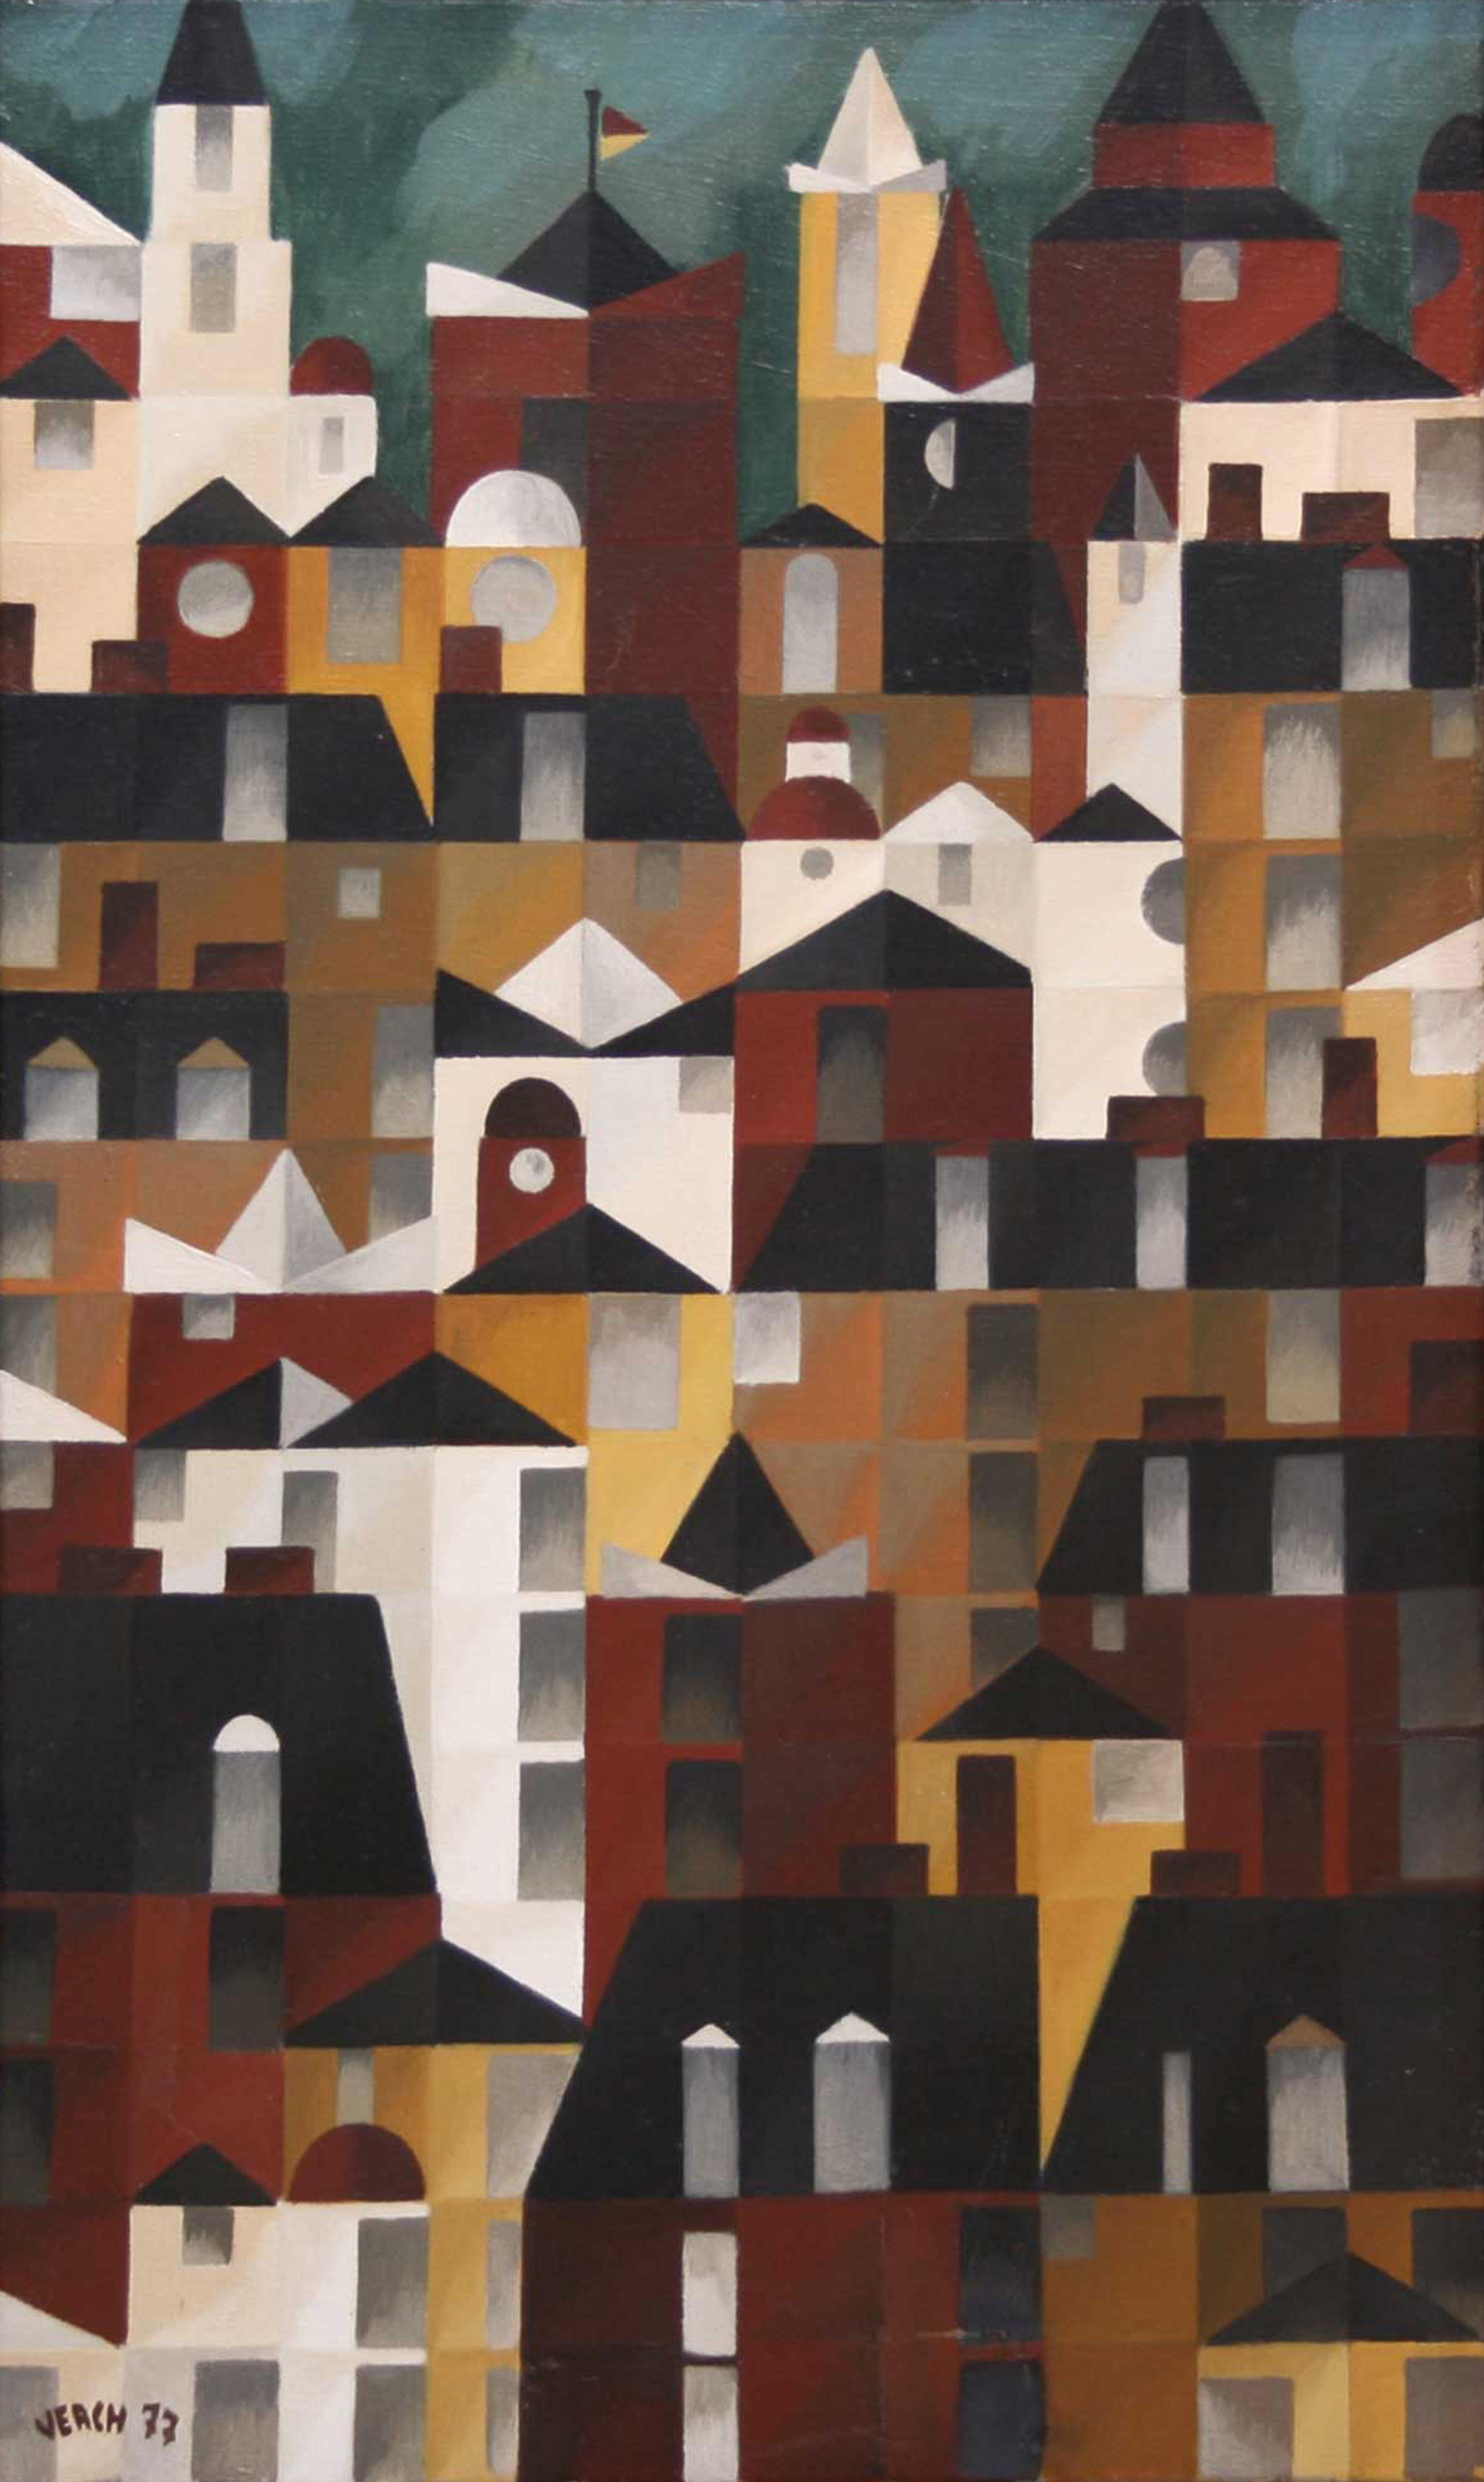 Helmut Verch Figurative Painting - Dächer und Türme / Roofs and Towers